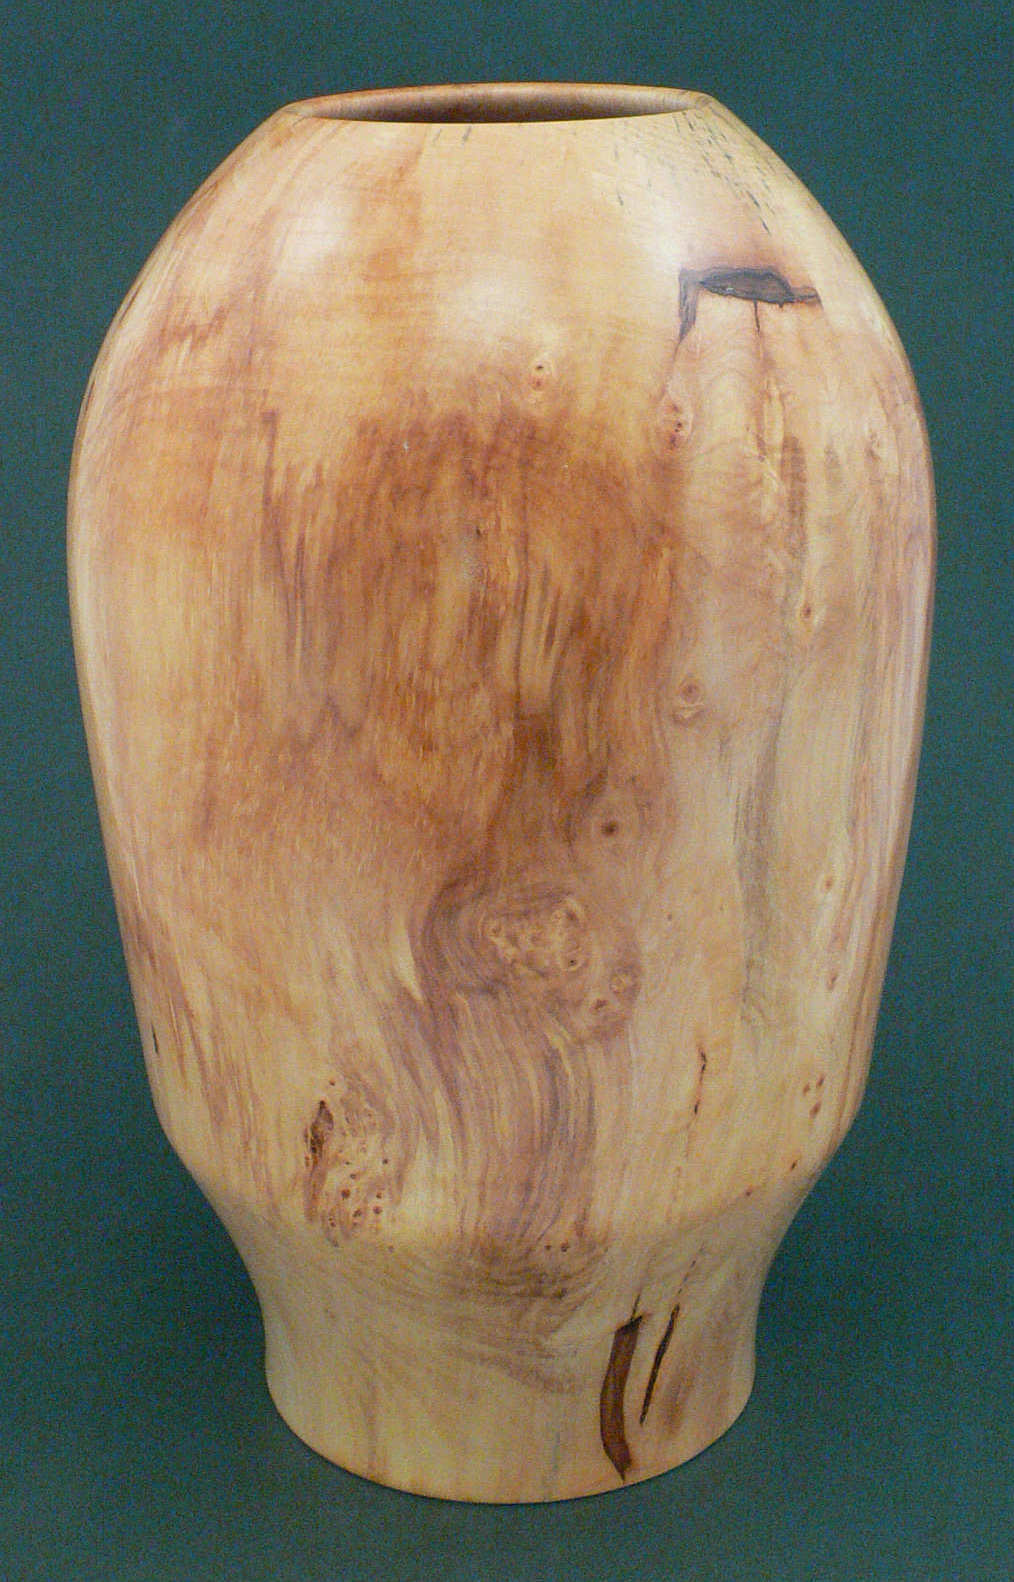 Wood art by Chris Rymer of Inside Out Wood Art made from - Horse Chestnut